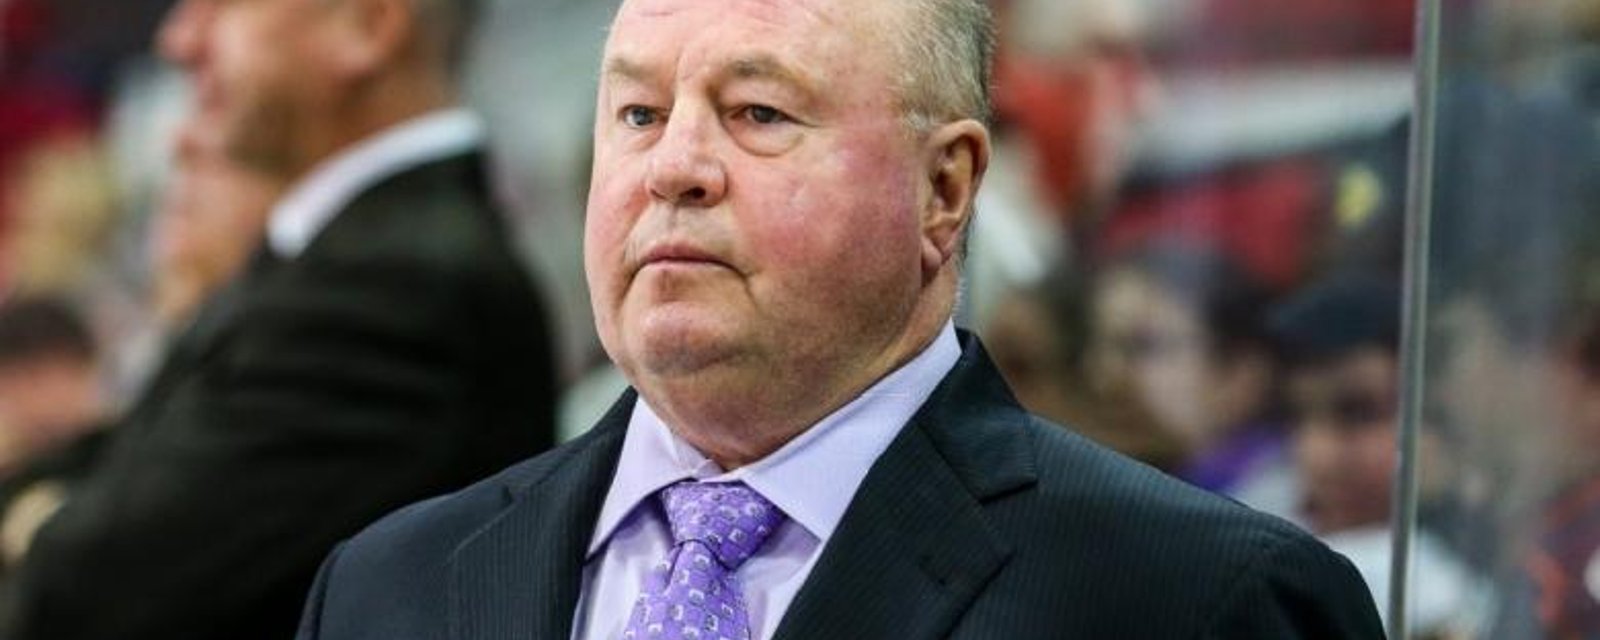 Bruce Boudreau comments on a controversial topic/player for the Wild.